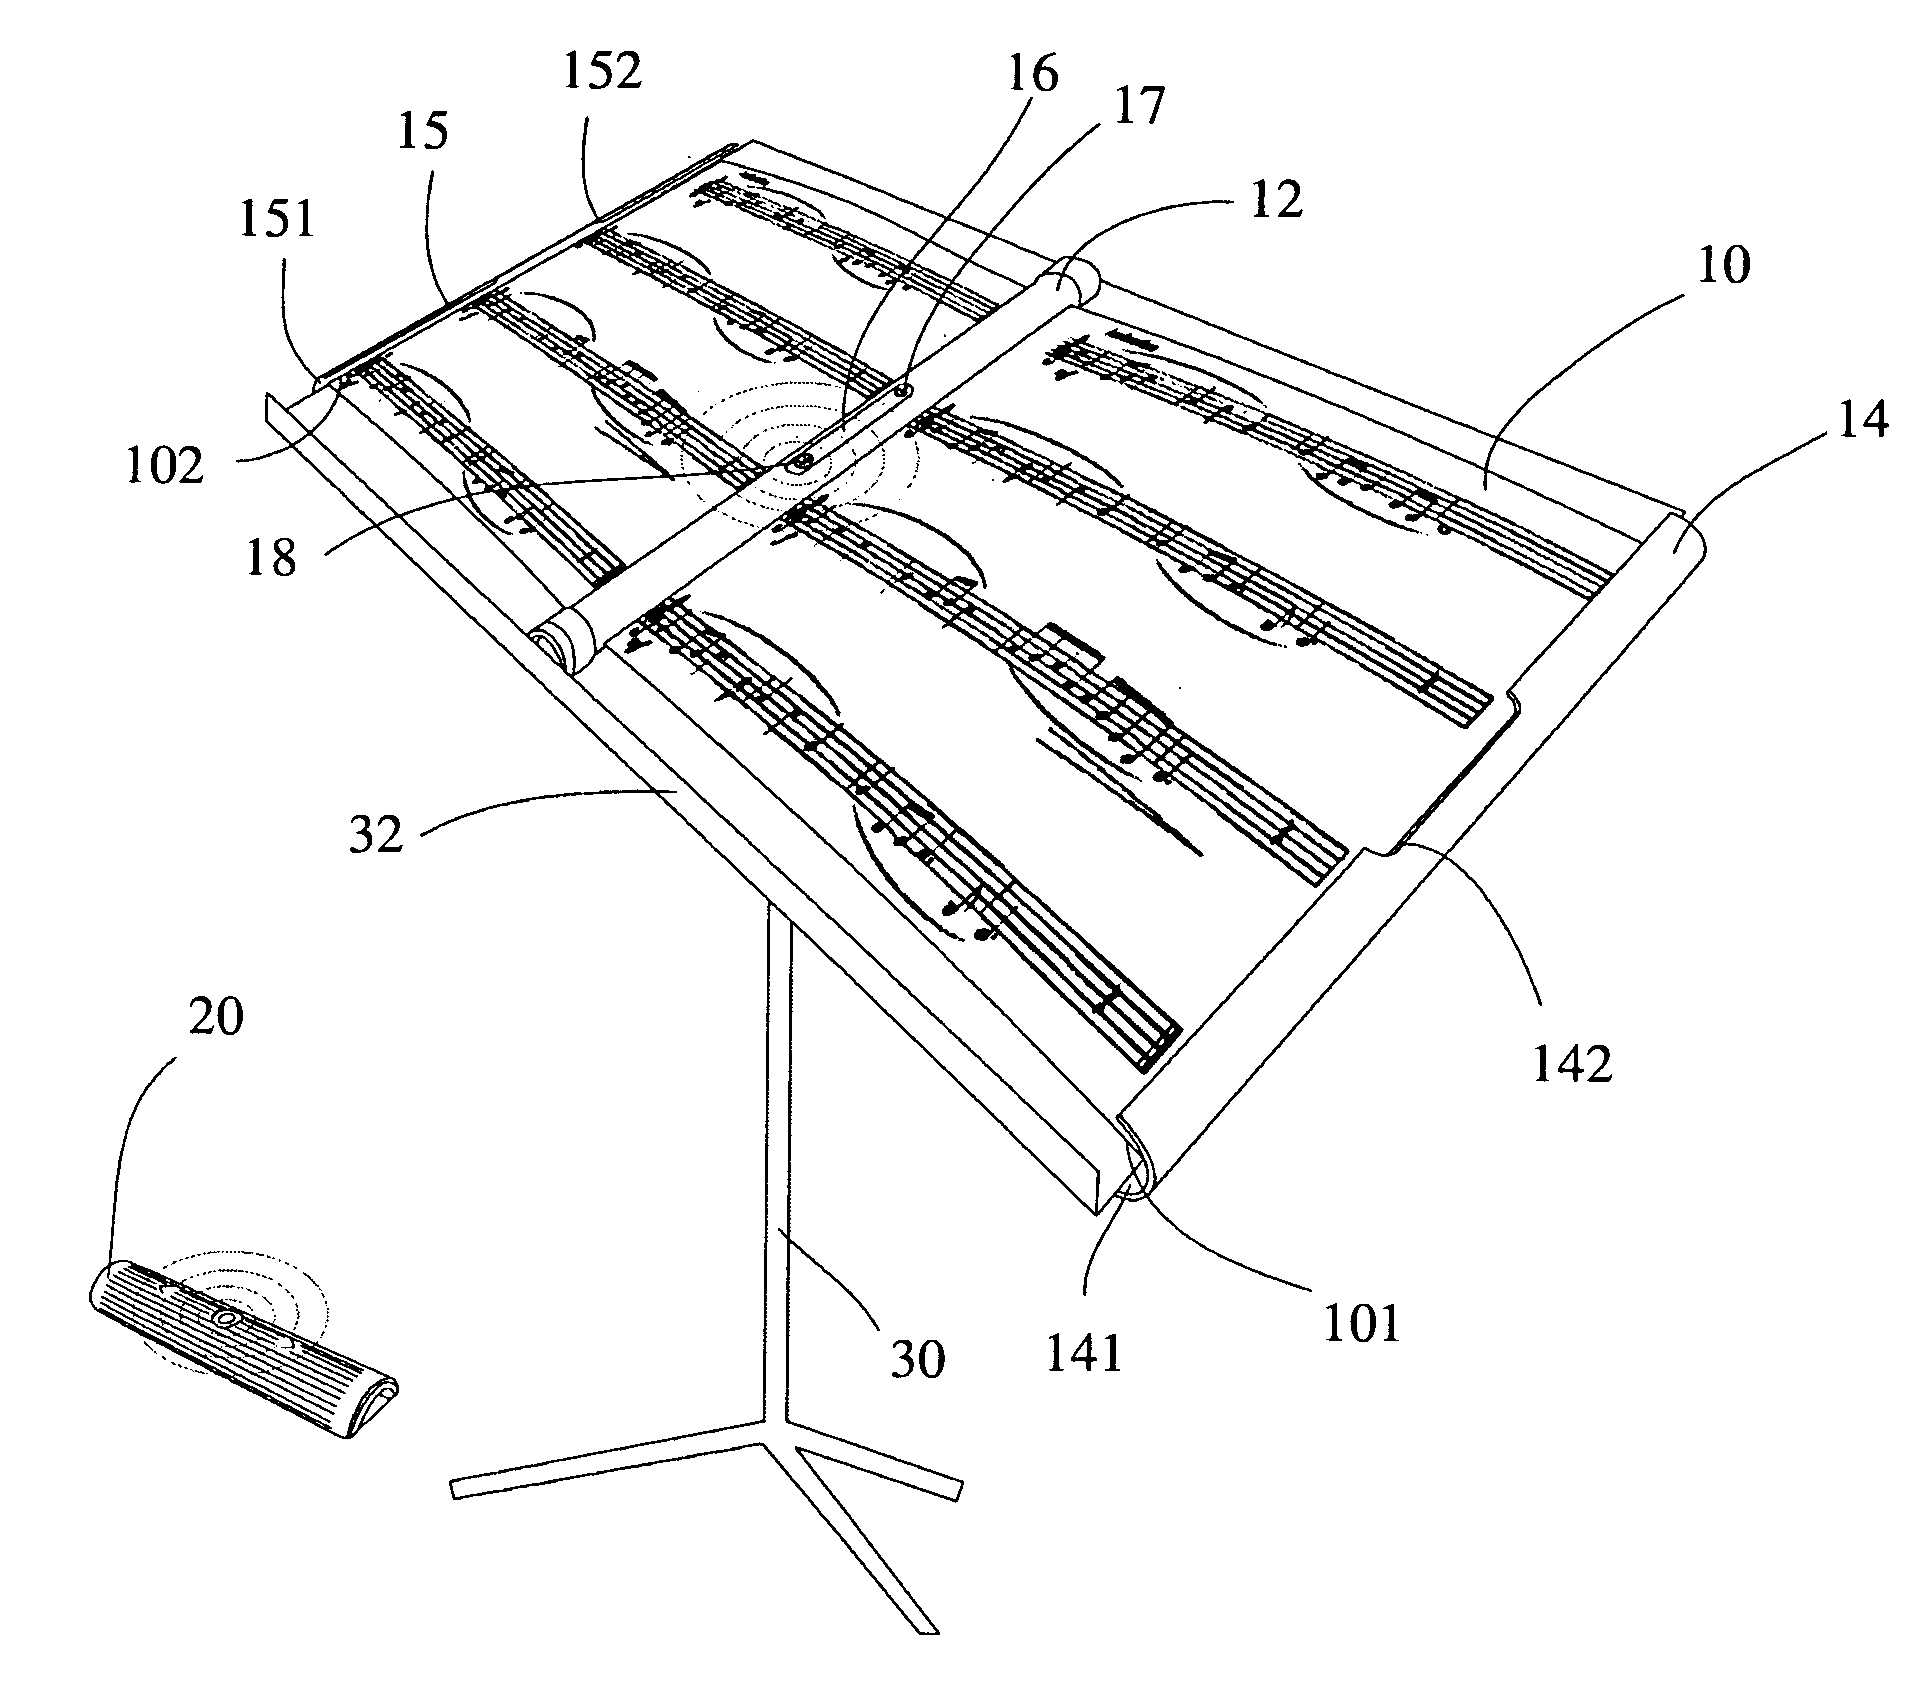 Electronic musical score display device